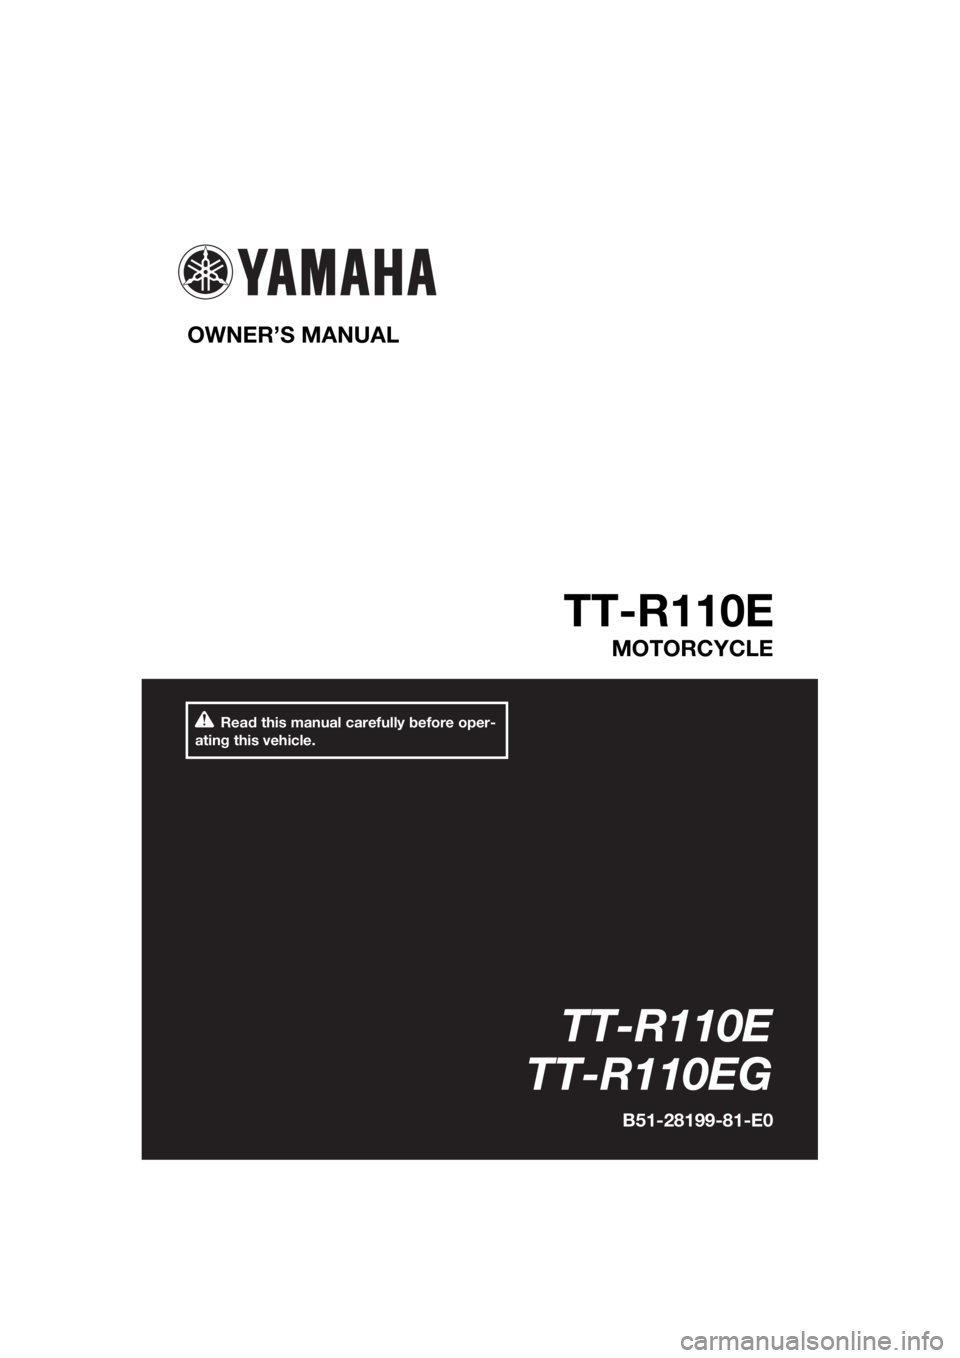 YAMAHA TT-R110E 2016  Owners Manual Read this manual carefully before oper-
ating this vehicle.
OWNER’S MANUAL 
TT-R110E
MOTORCYCLE
TT-R110E
TT-R110EG
B51-28199-81-E0
UB5181E0.book  Page 1  Monday, April 6, 2015  9:22 AM 